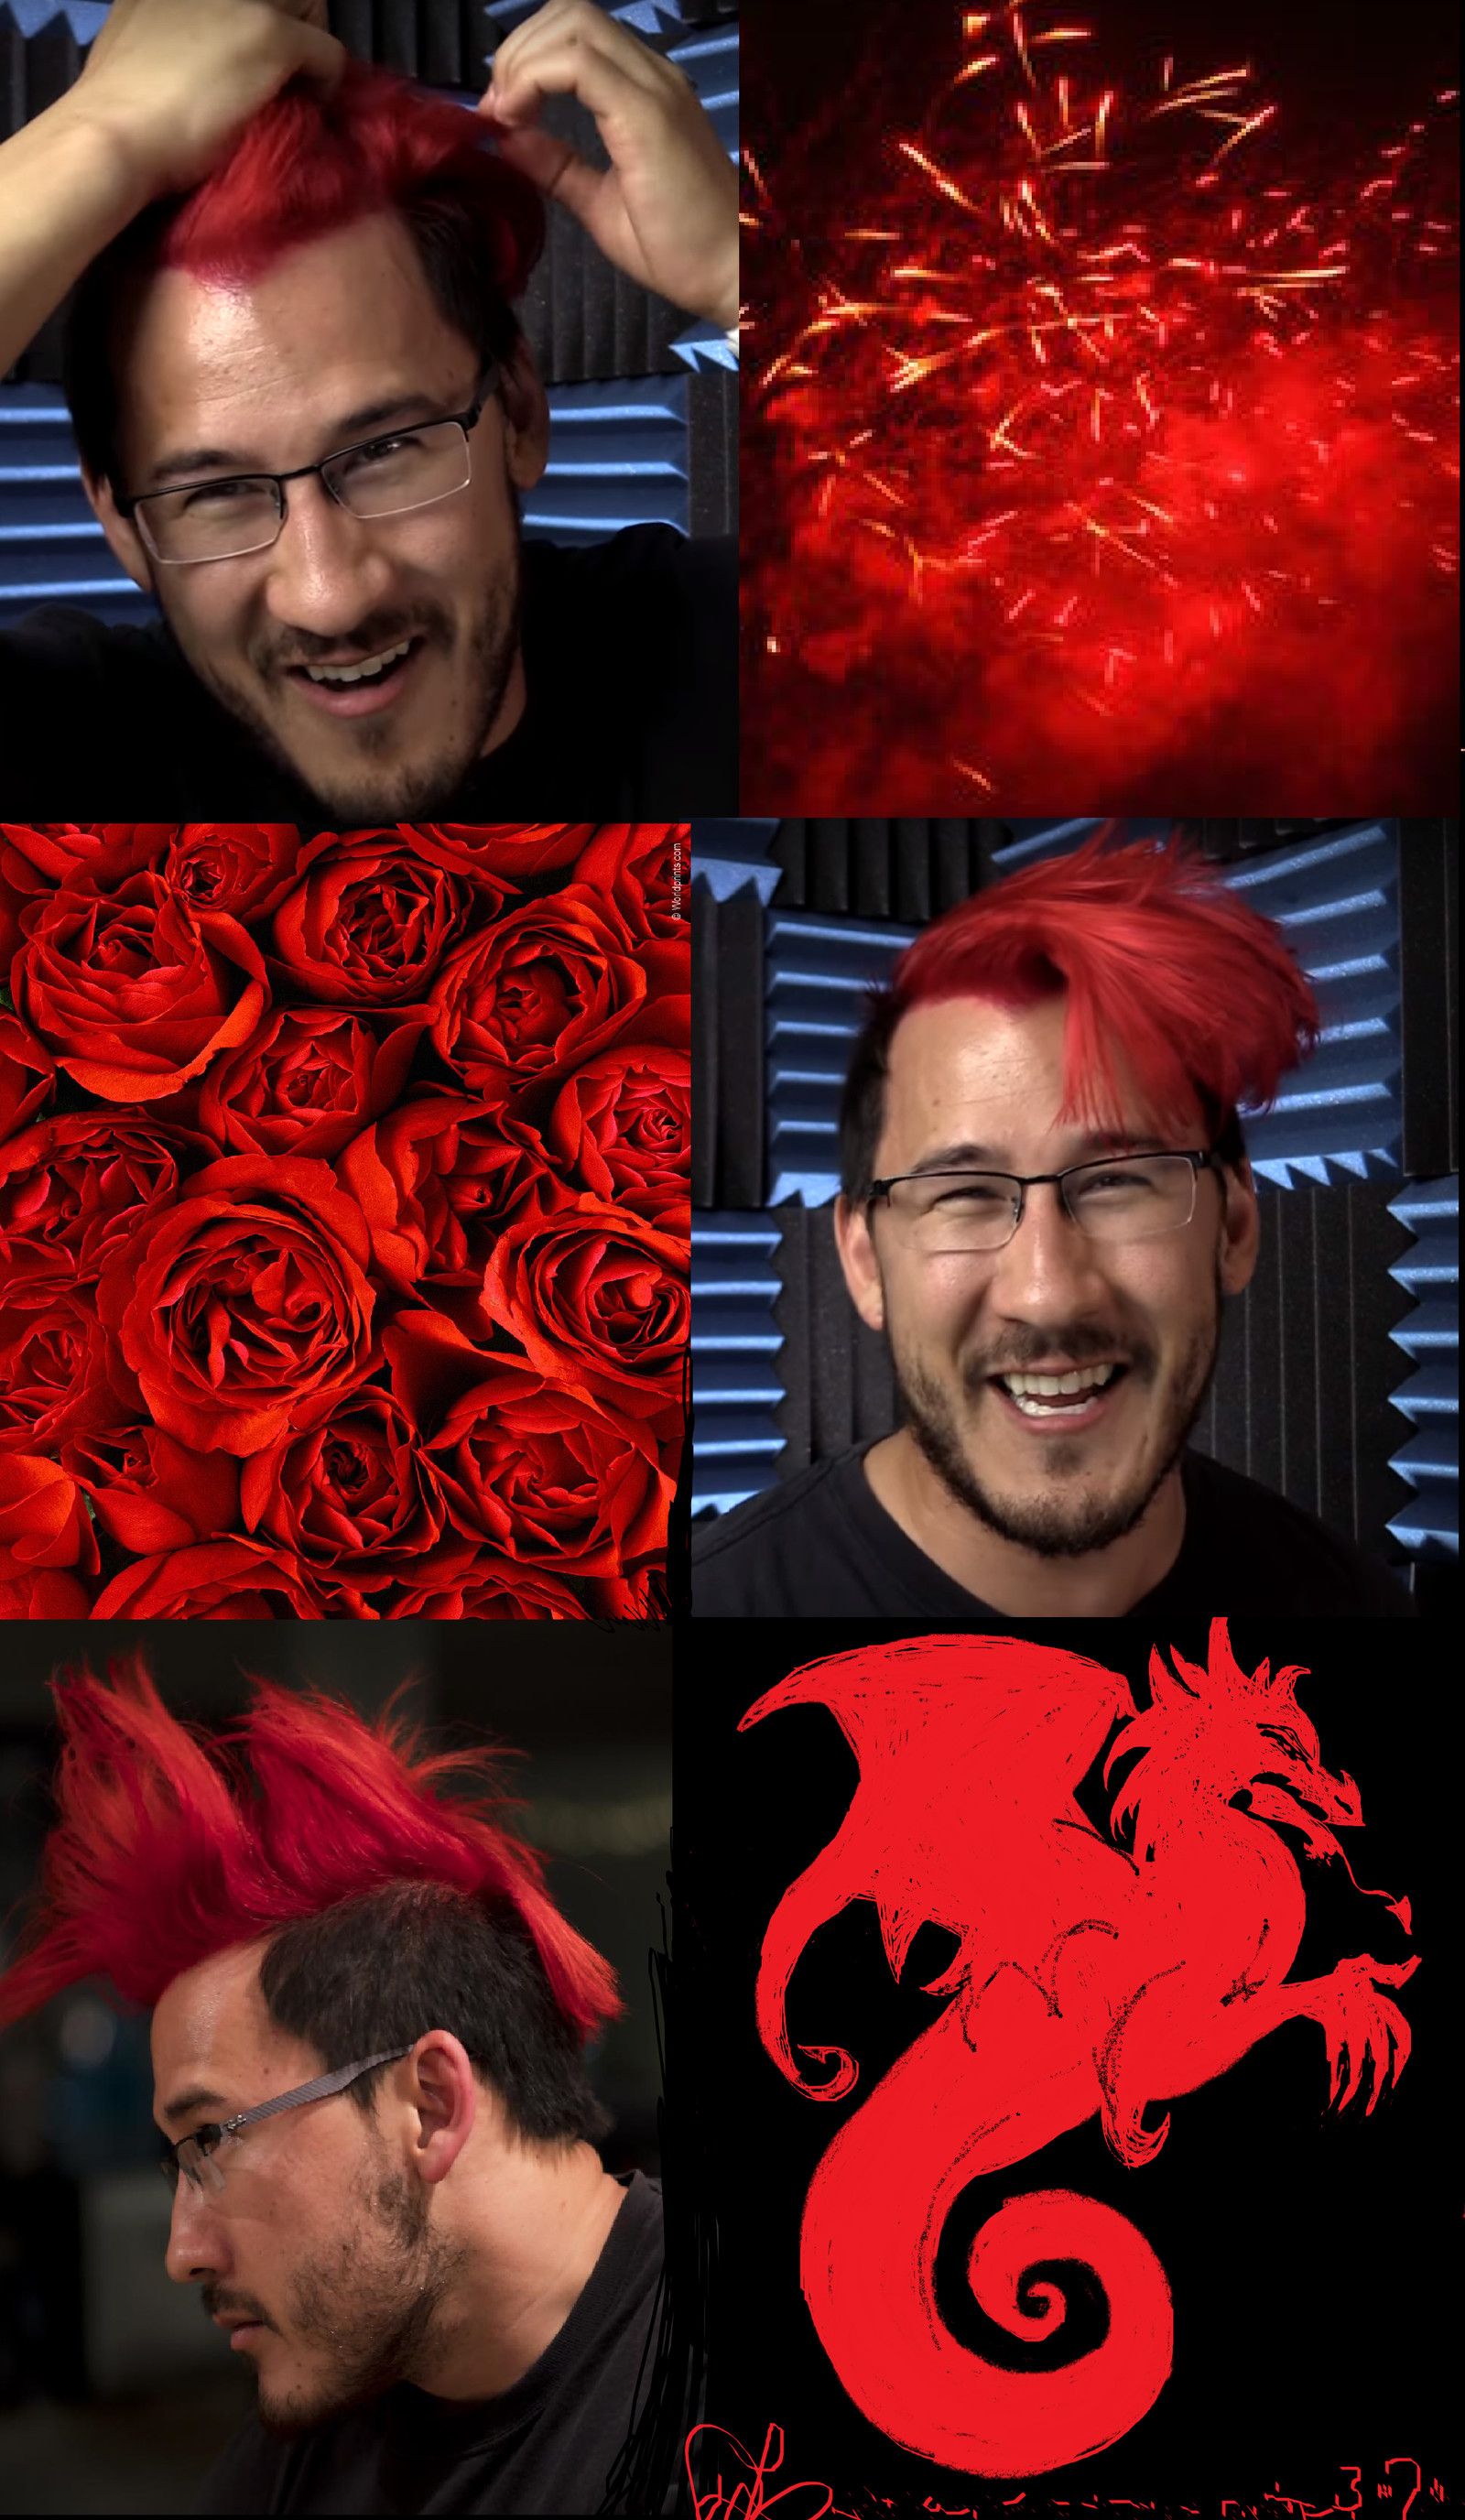 A collage of Markiplier with red hair and a red dragon on his shirt. - Markiplier